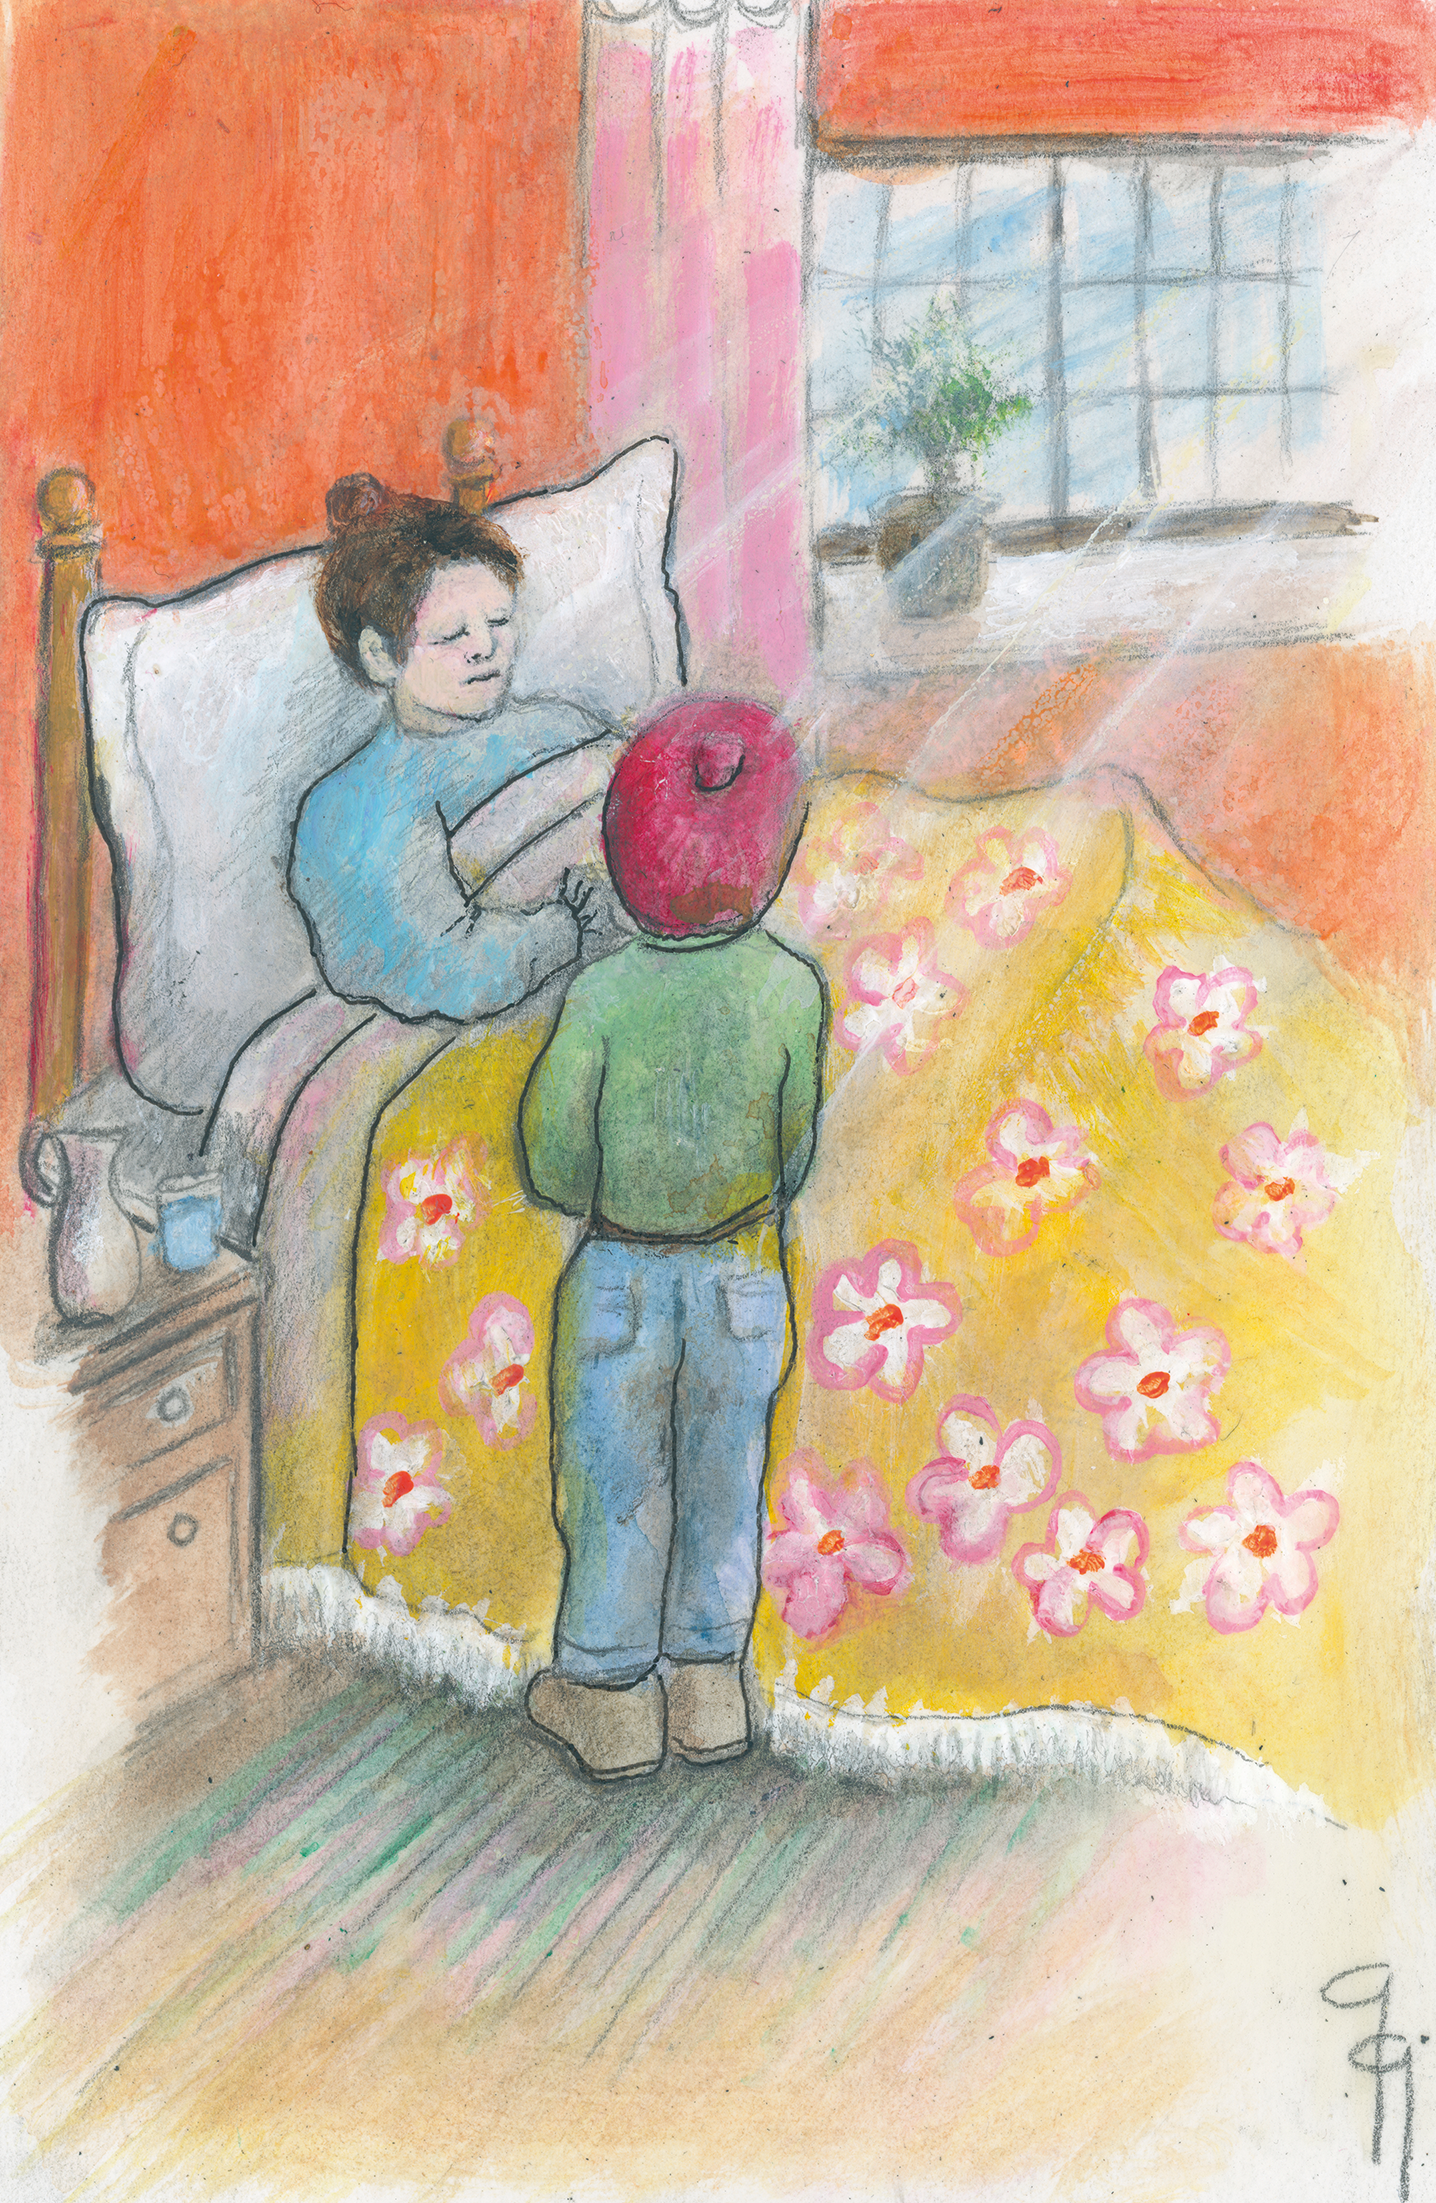 Image of REDCAP by his mother's bedside